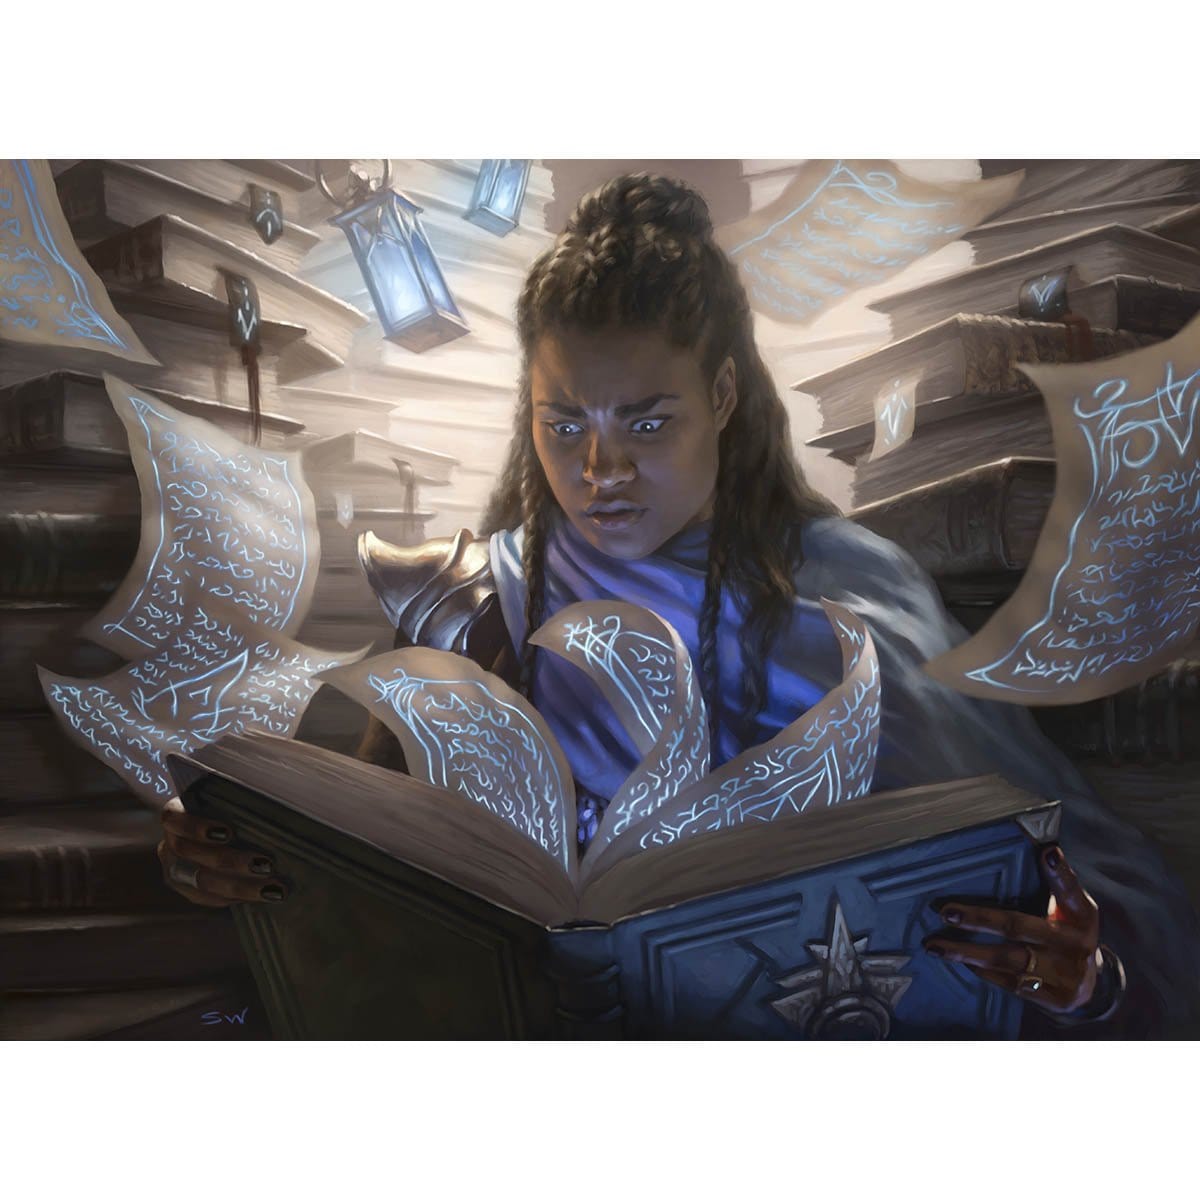 Compulsive Research Print - Print - Original Magic Art - Accessories for Magic the Gathering and other card games